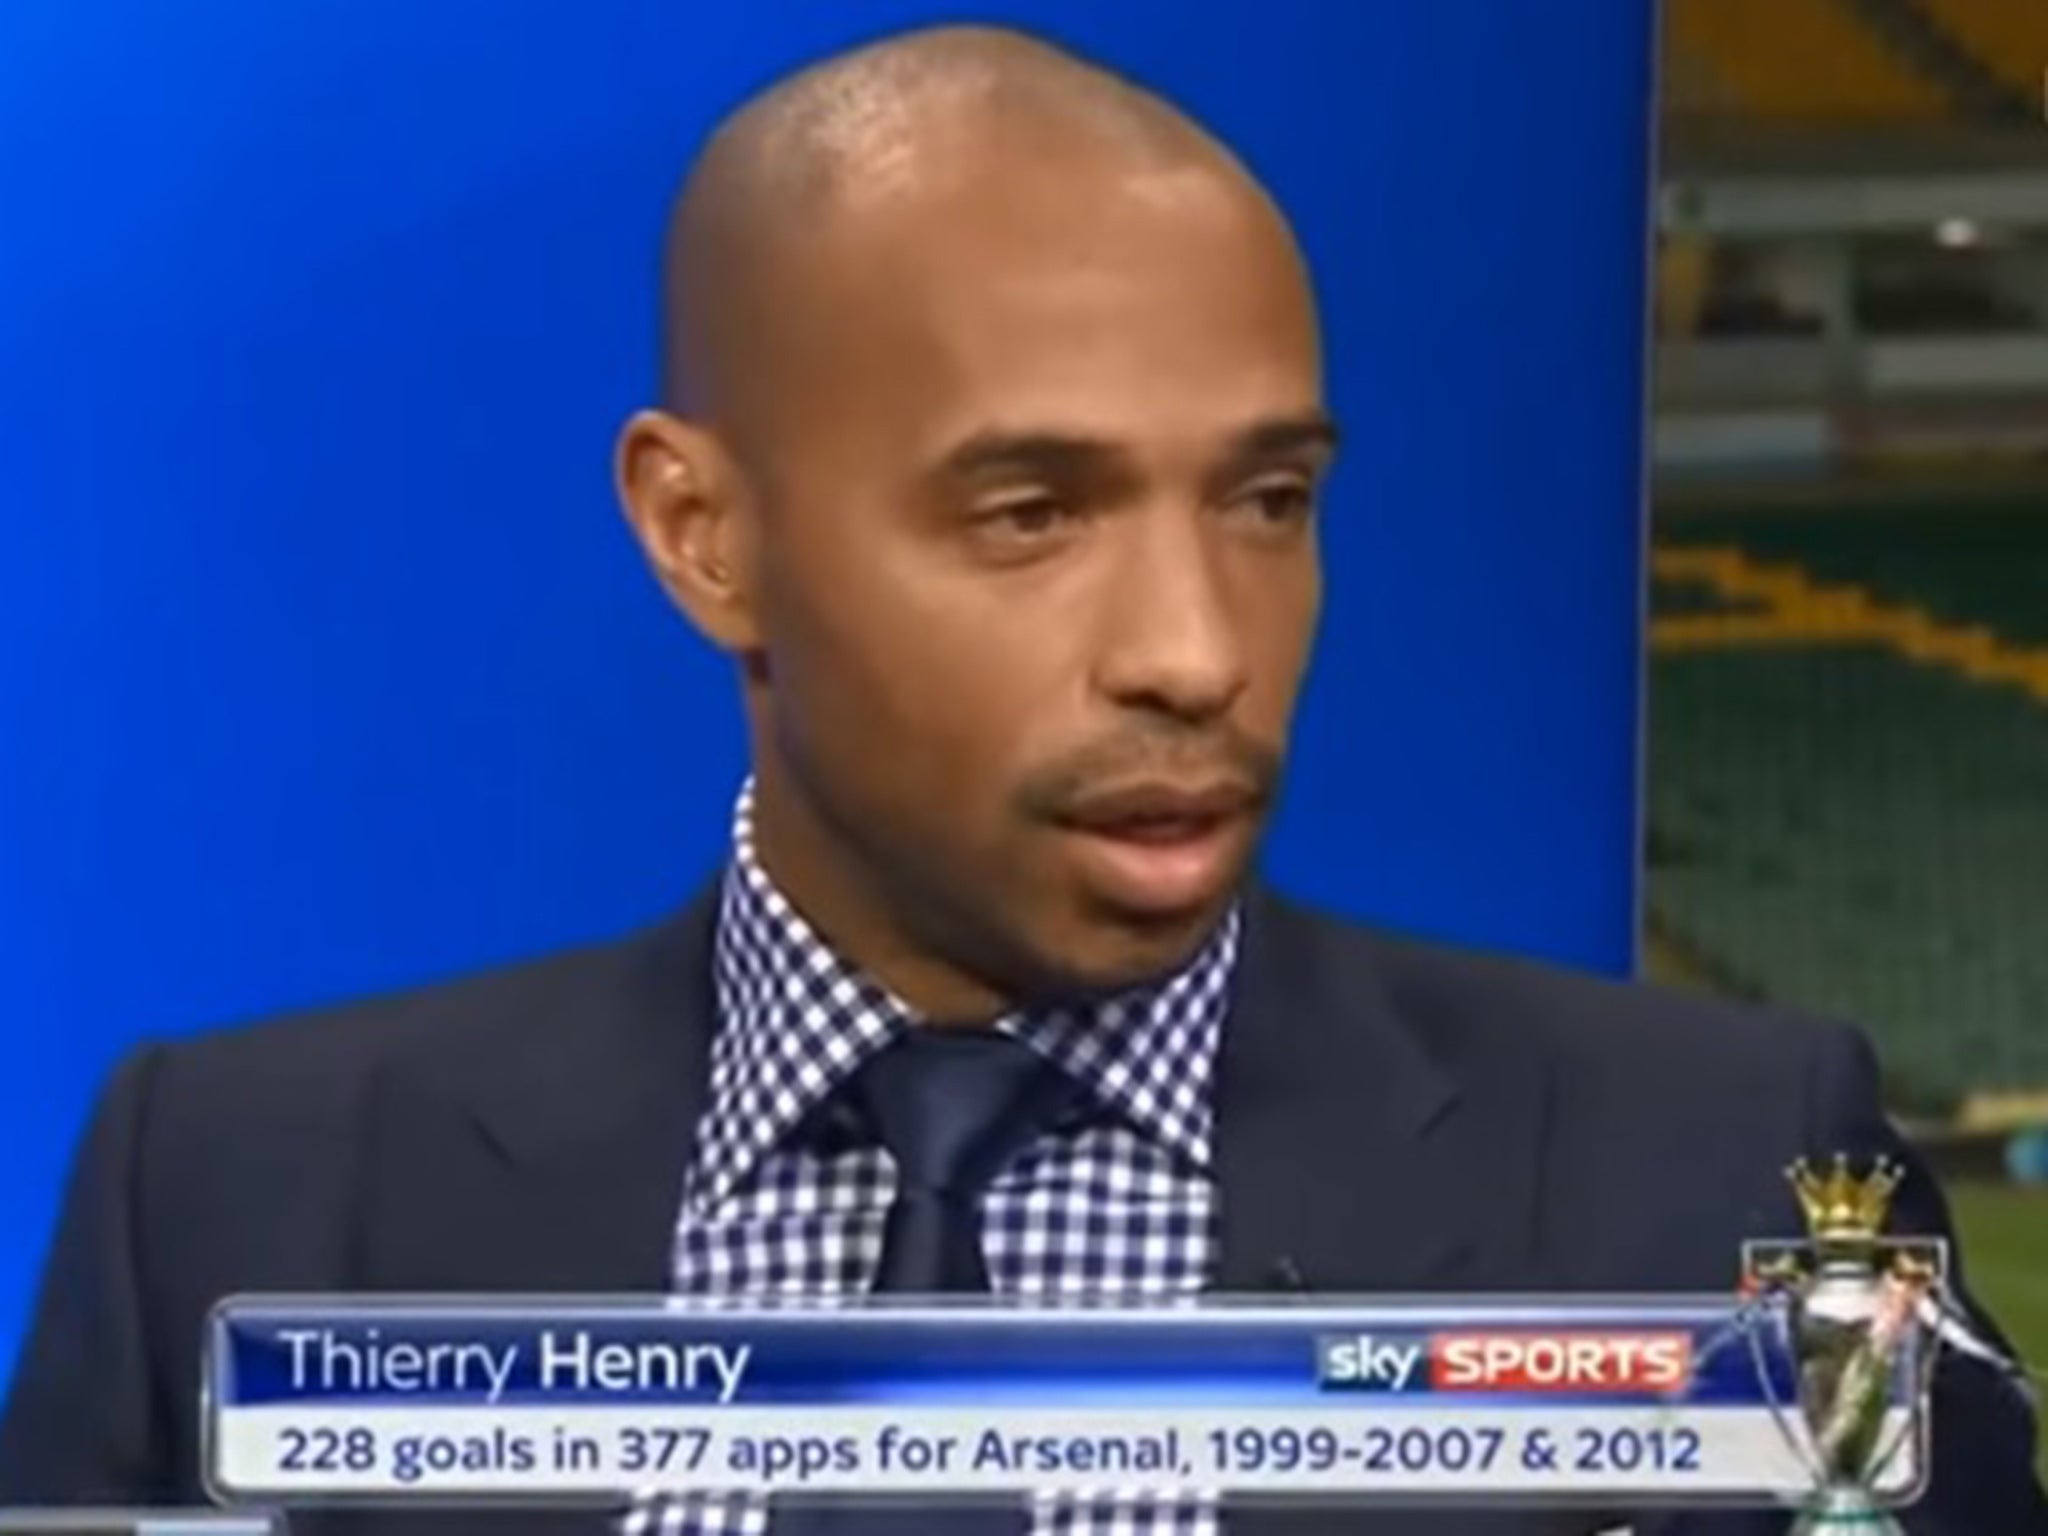 Thierry Henry speaks on Sky Sports after the match